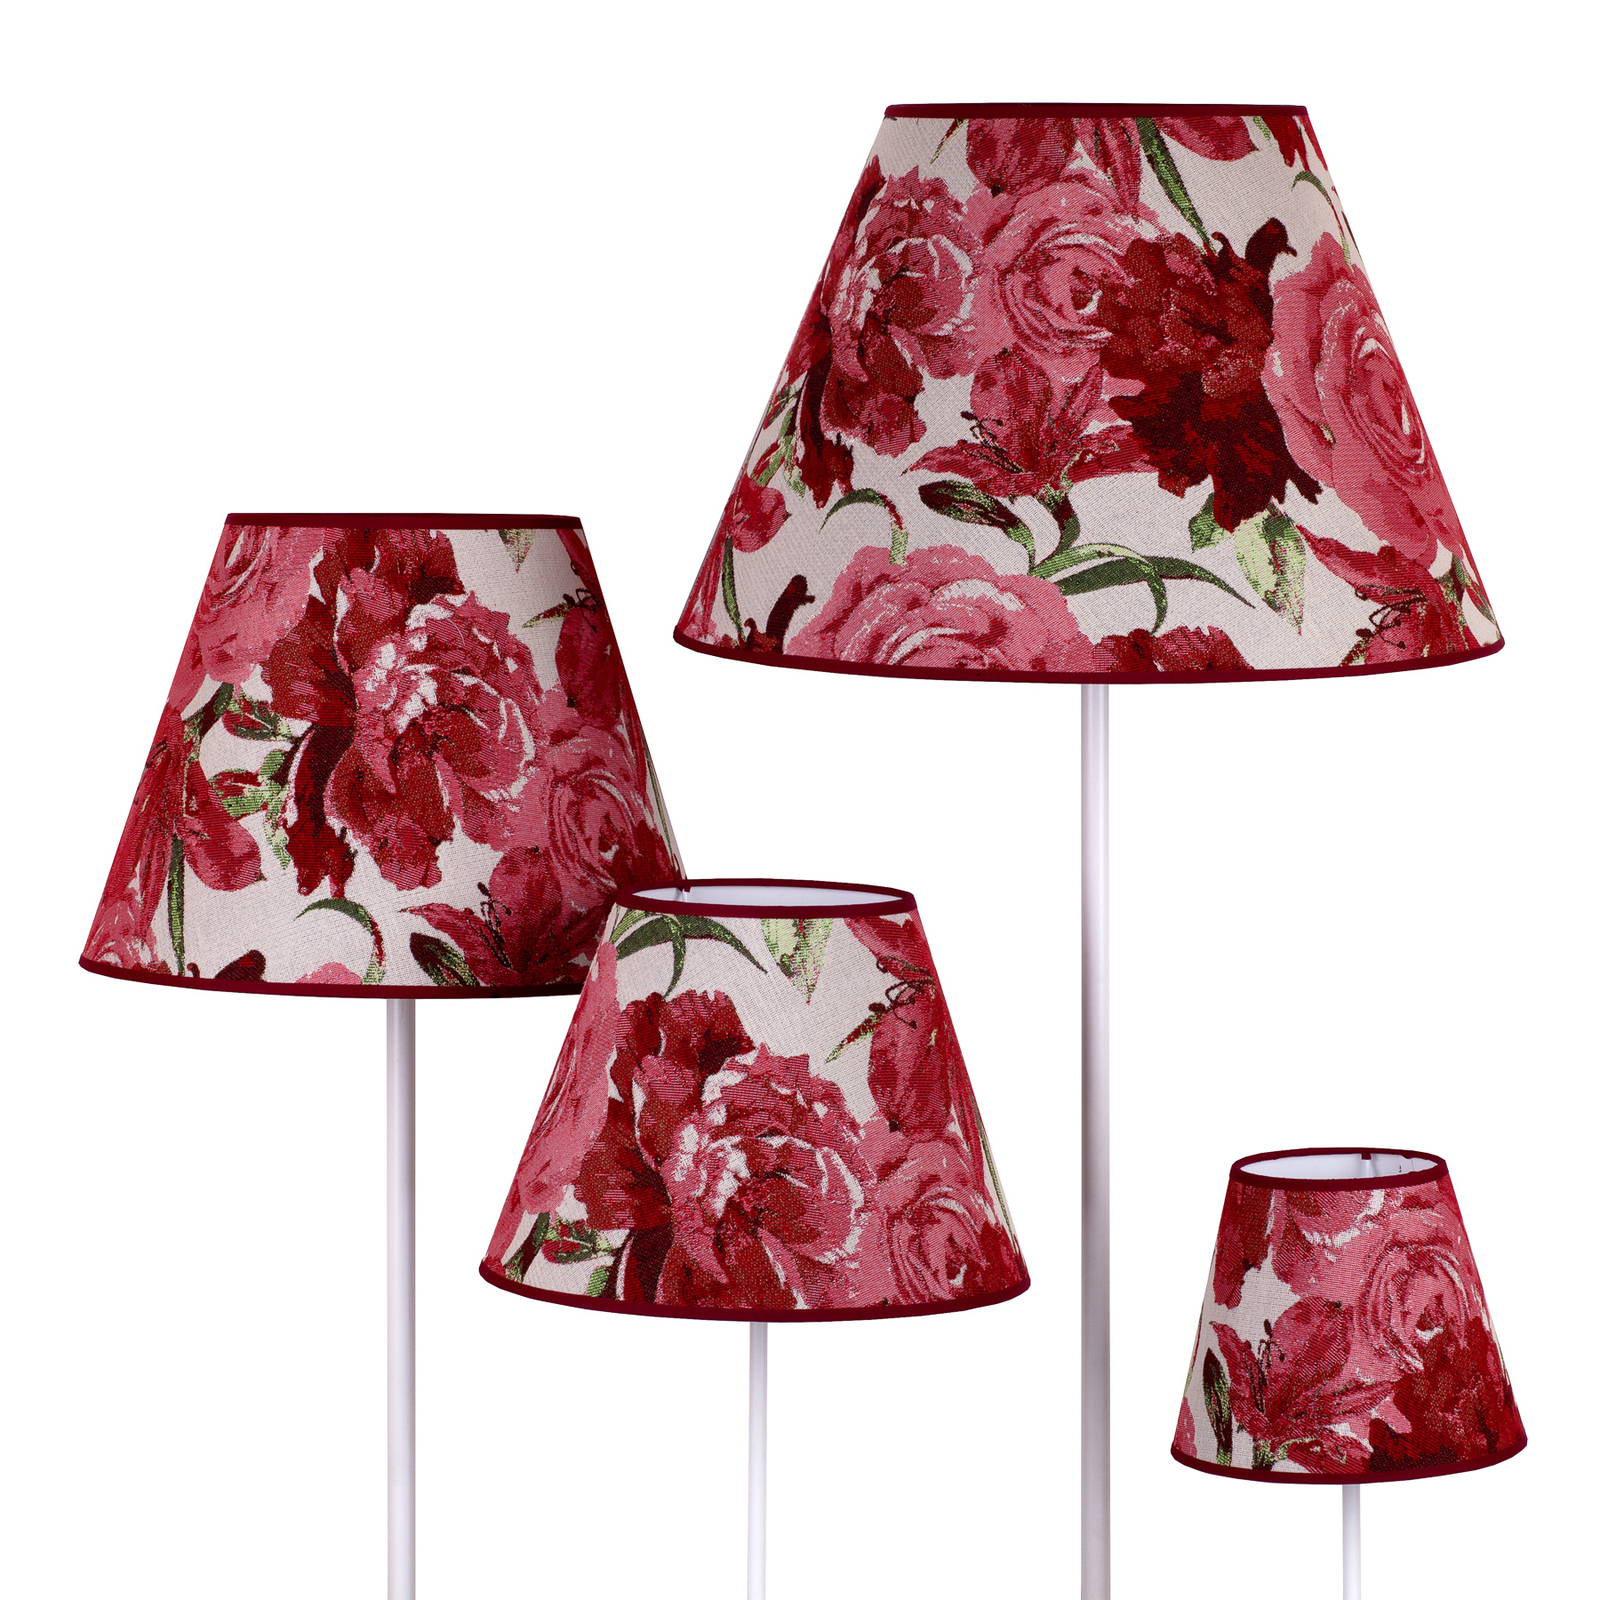 Sofia lampshade height 31 cm, floral pattern red